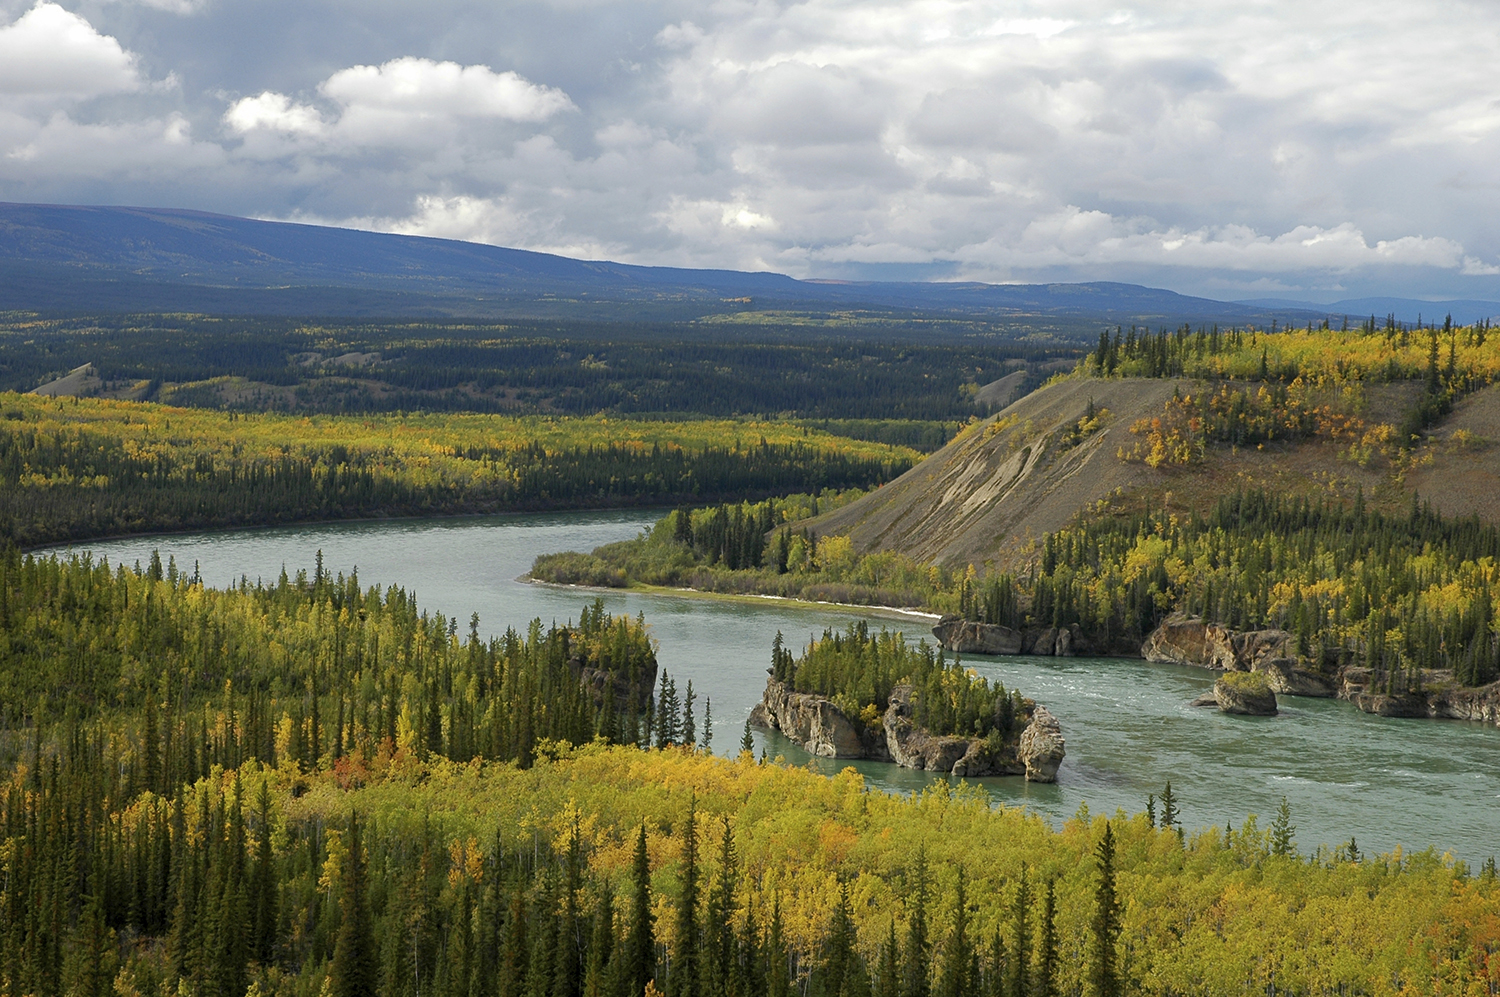 This Is Hardest General Knowledge Quiz You'll Ever Take, I Promise Yukon river